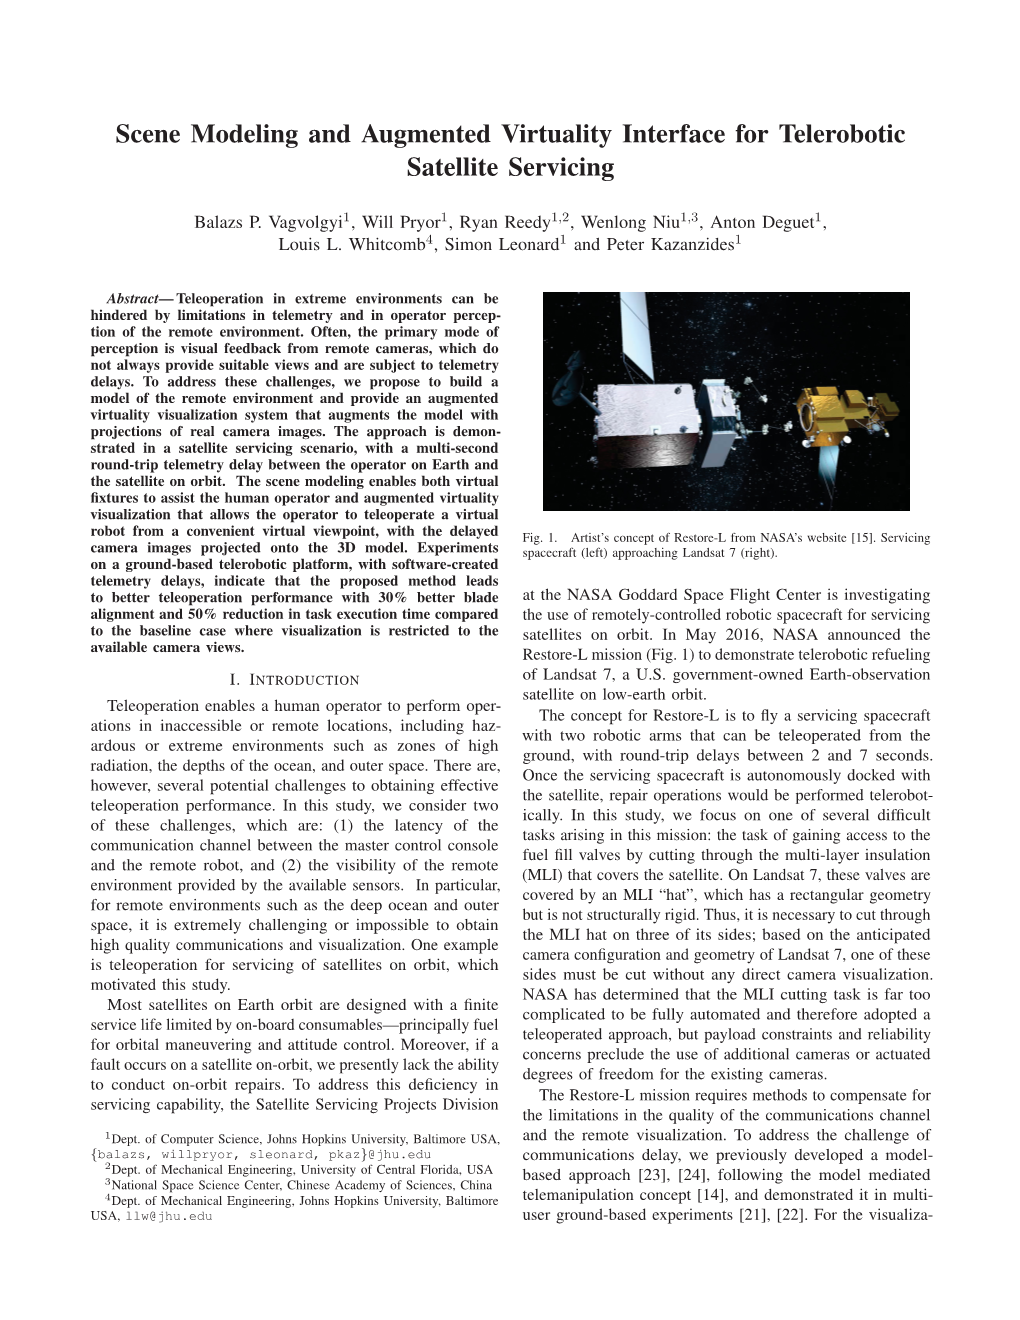 Scene Modeling and Augmented Virtuality Interface for Telerobotic Satellite Servicing